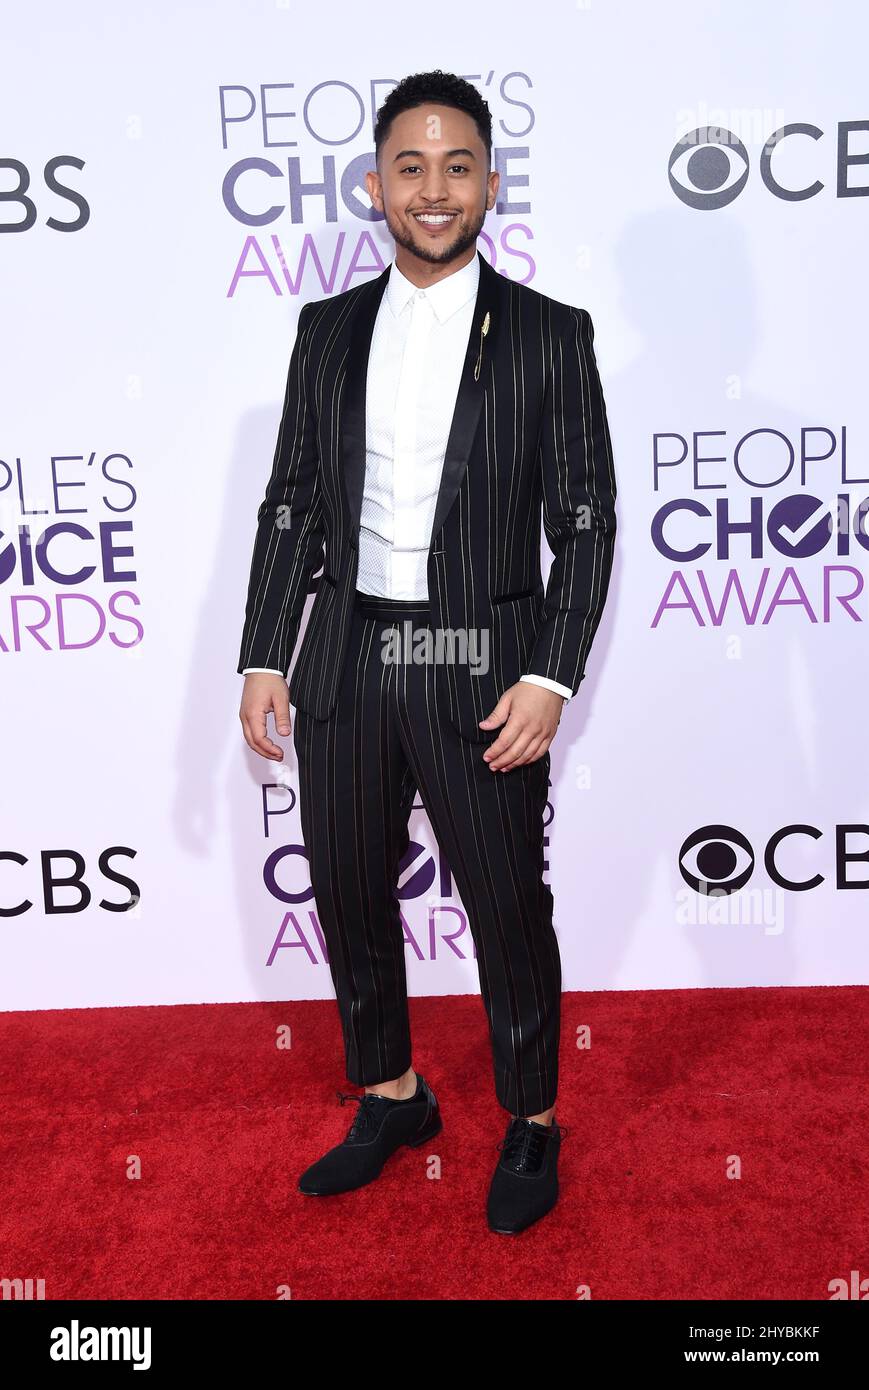 Taj Mowrey nimmt an den People's Choice Awards 2017 im Microsoft Theater L.A. Teil Live in LSO Angeles, USA Stockfoto